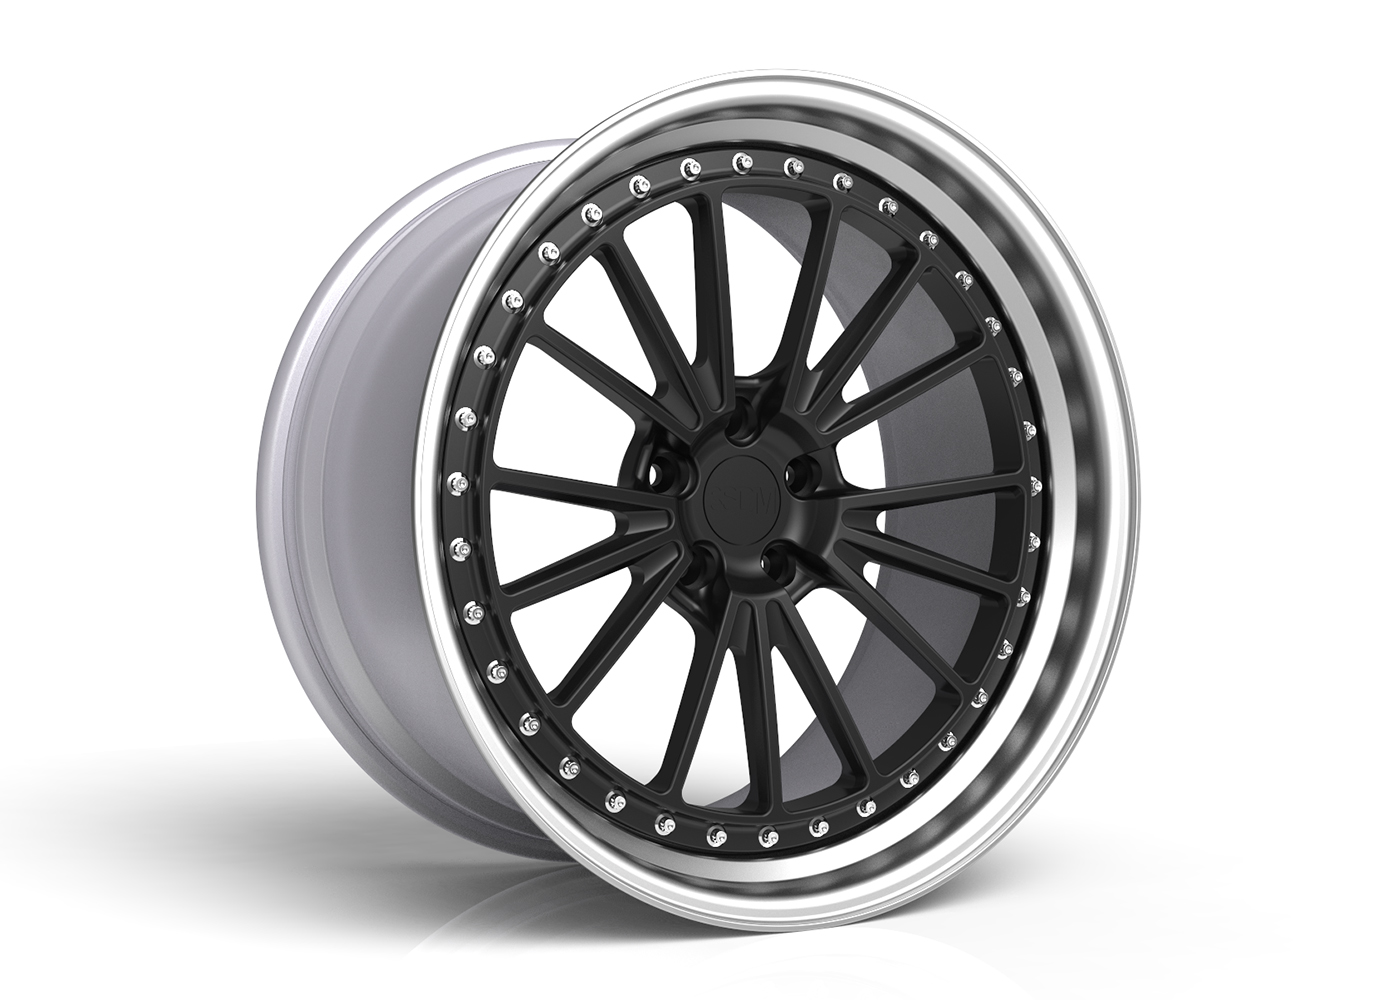 3SDM | Cast & Forged Alloy Wheel Brand 3.52fx3l Forged 3.52  